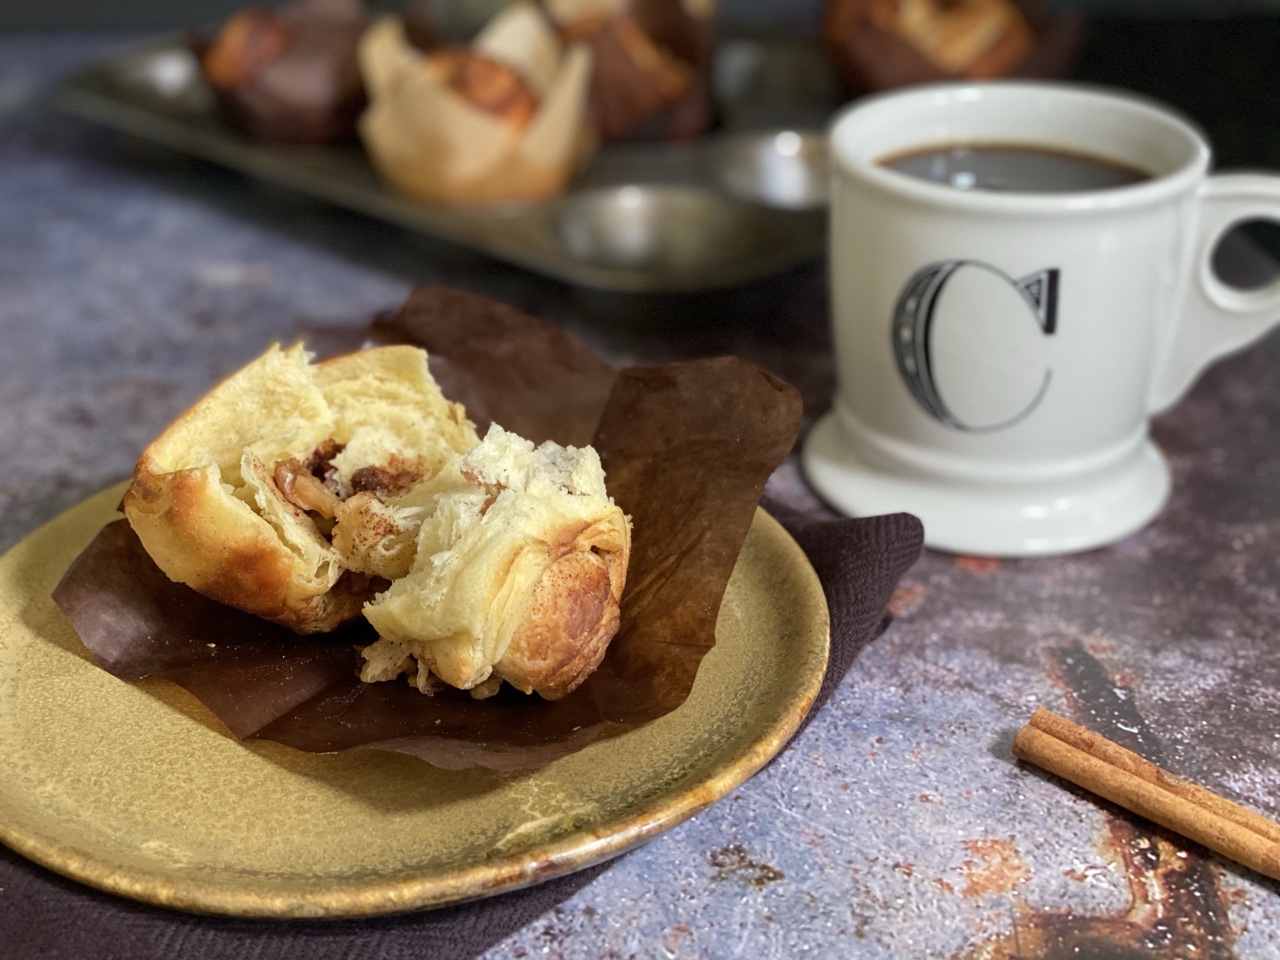 805B9A7D 84D2 40BC B4E7 4A3D78BD5879 - Pull Apart Cinnamon Sugar Flaky Pastries with Walnuts